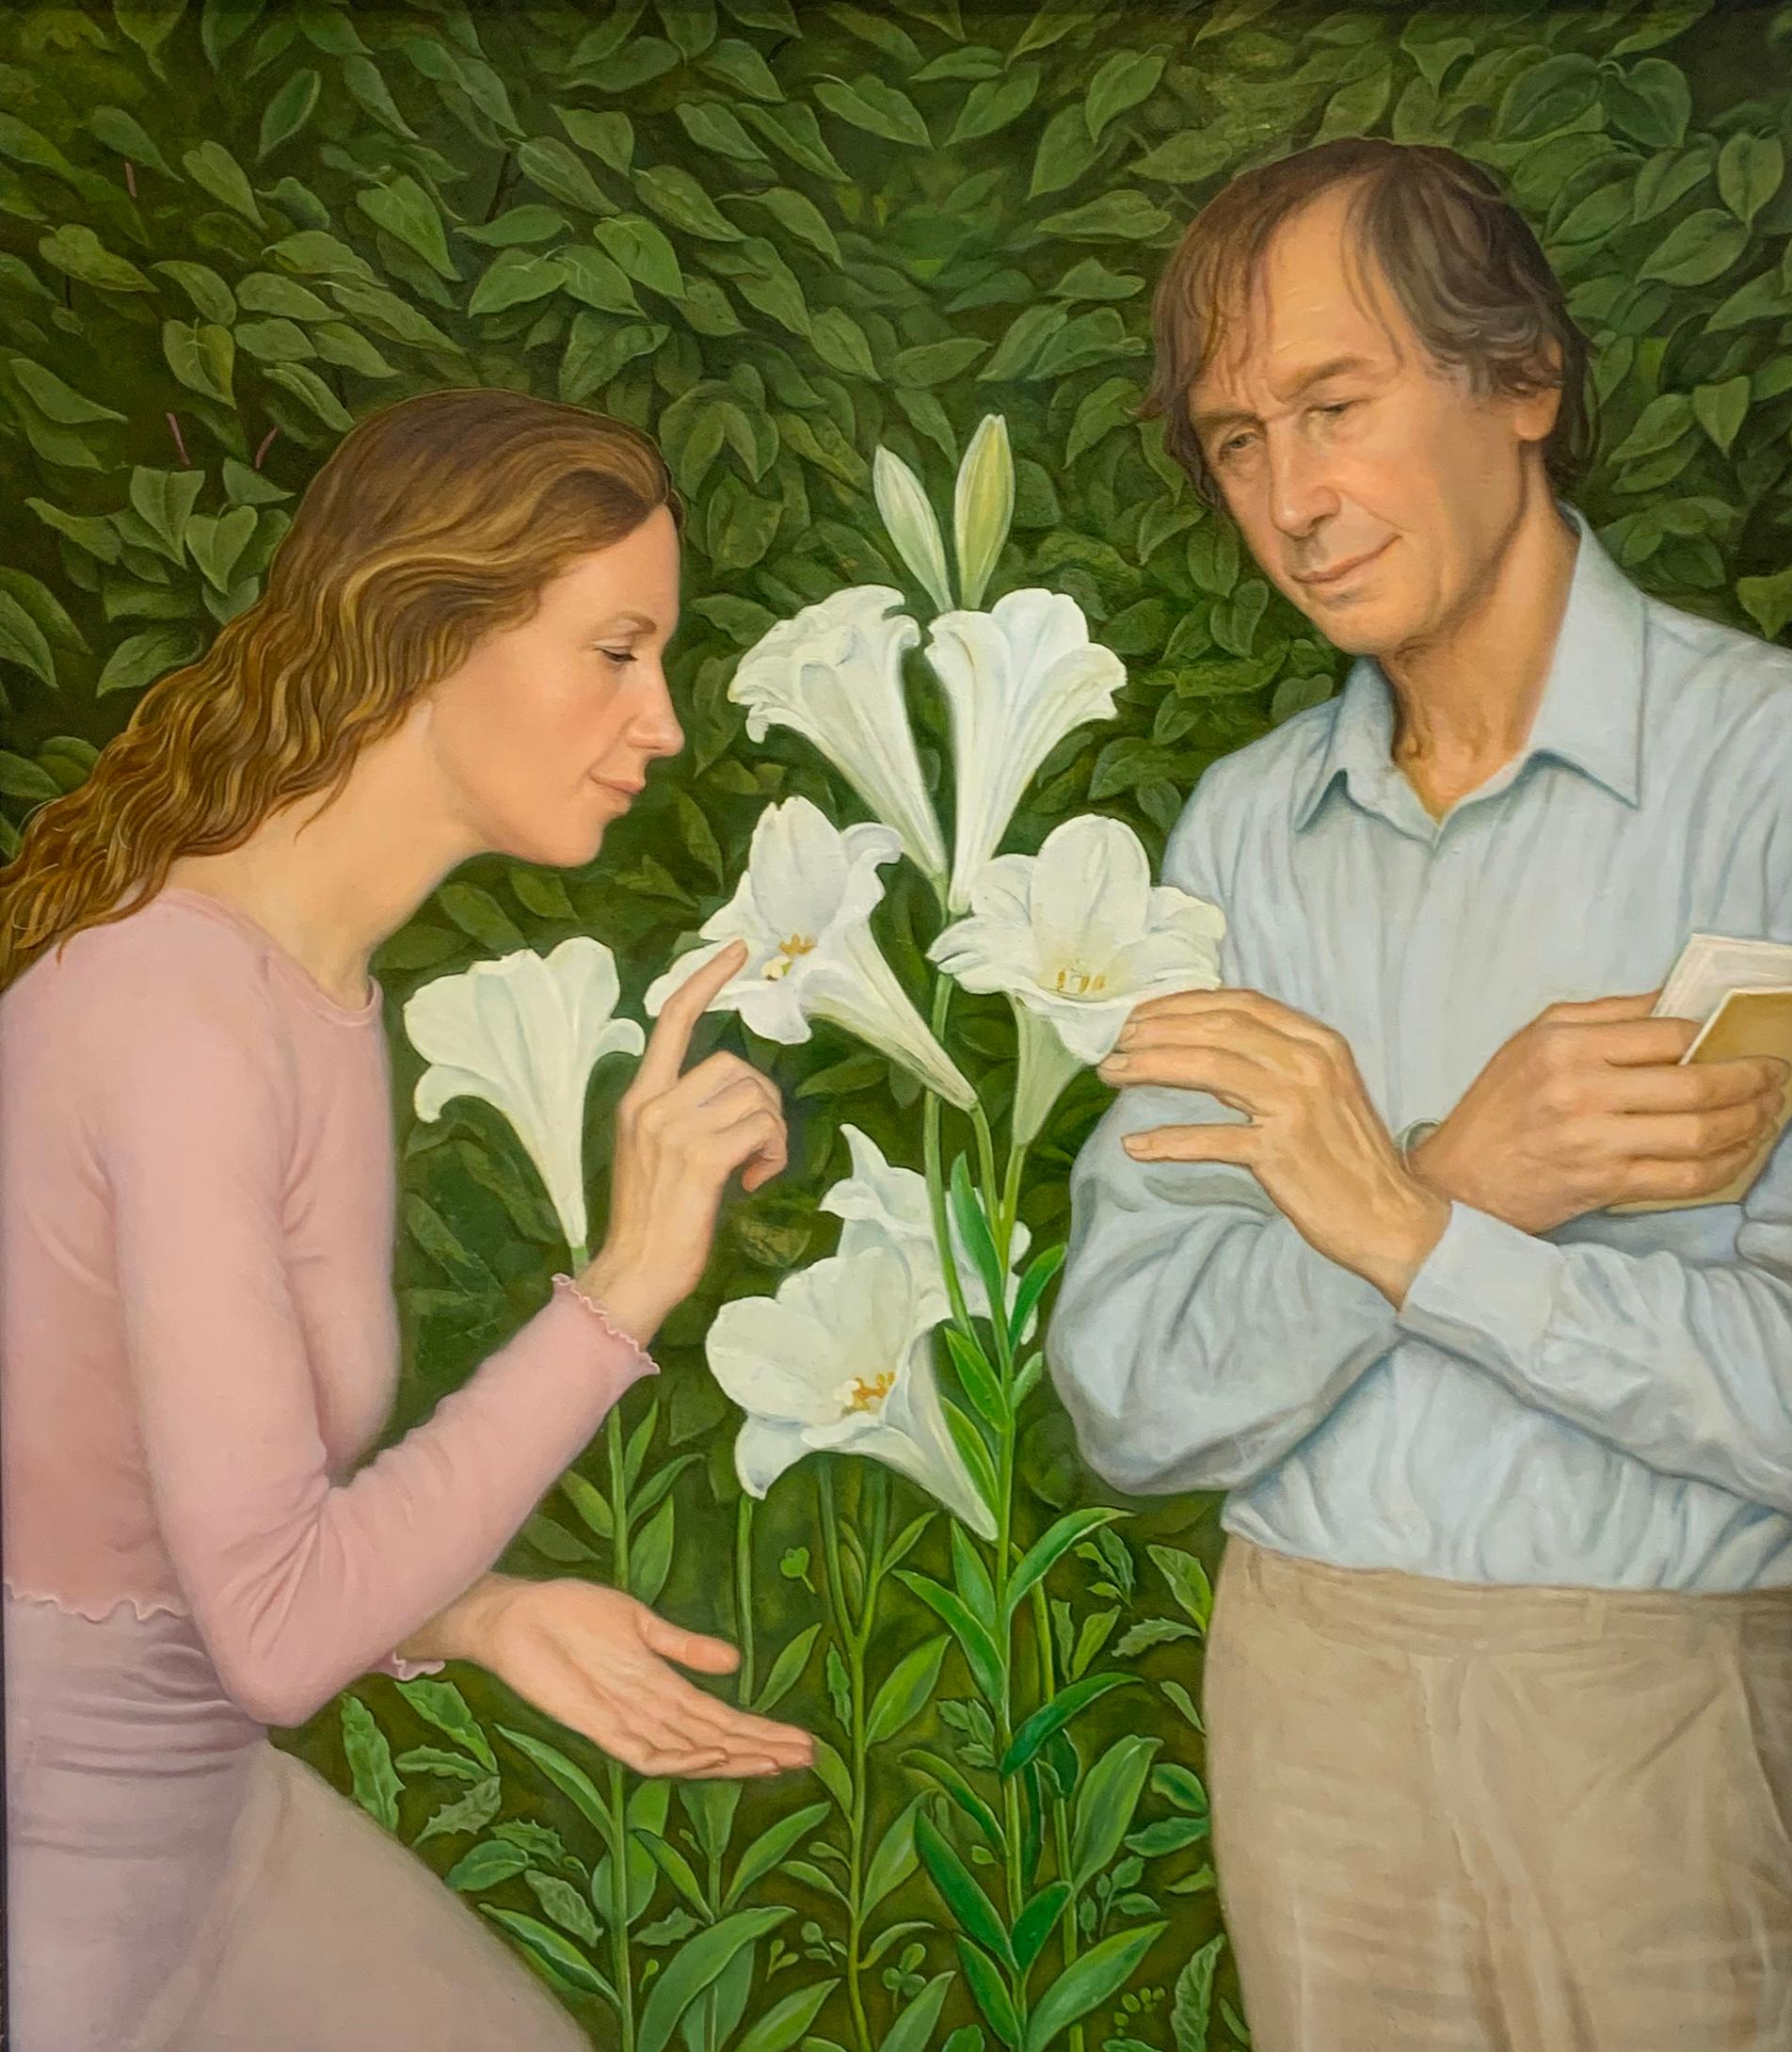 The lilies have blossomed. Rural life of an intellectual. Original modern art painting